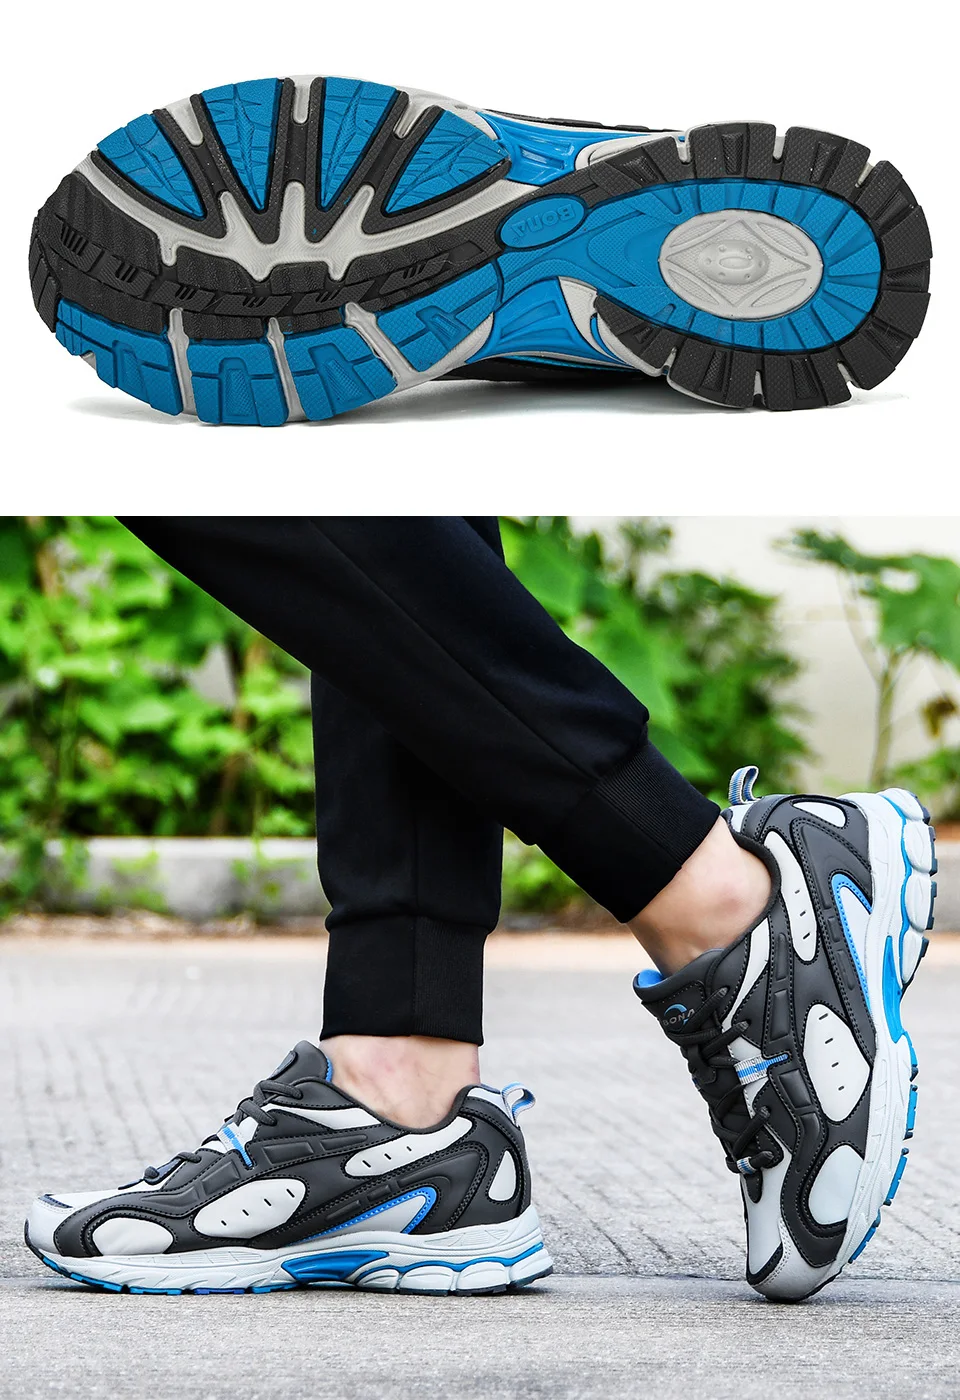 BONA New Style Sports Shoes Men Sneakers Lace-Up Cow Split Breathable Walking Shoes Outdoor Running Shoes Man Jogging Shoes